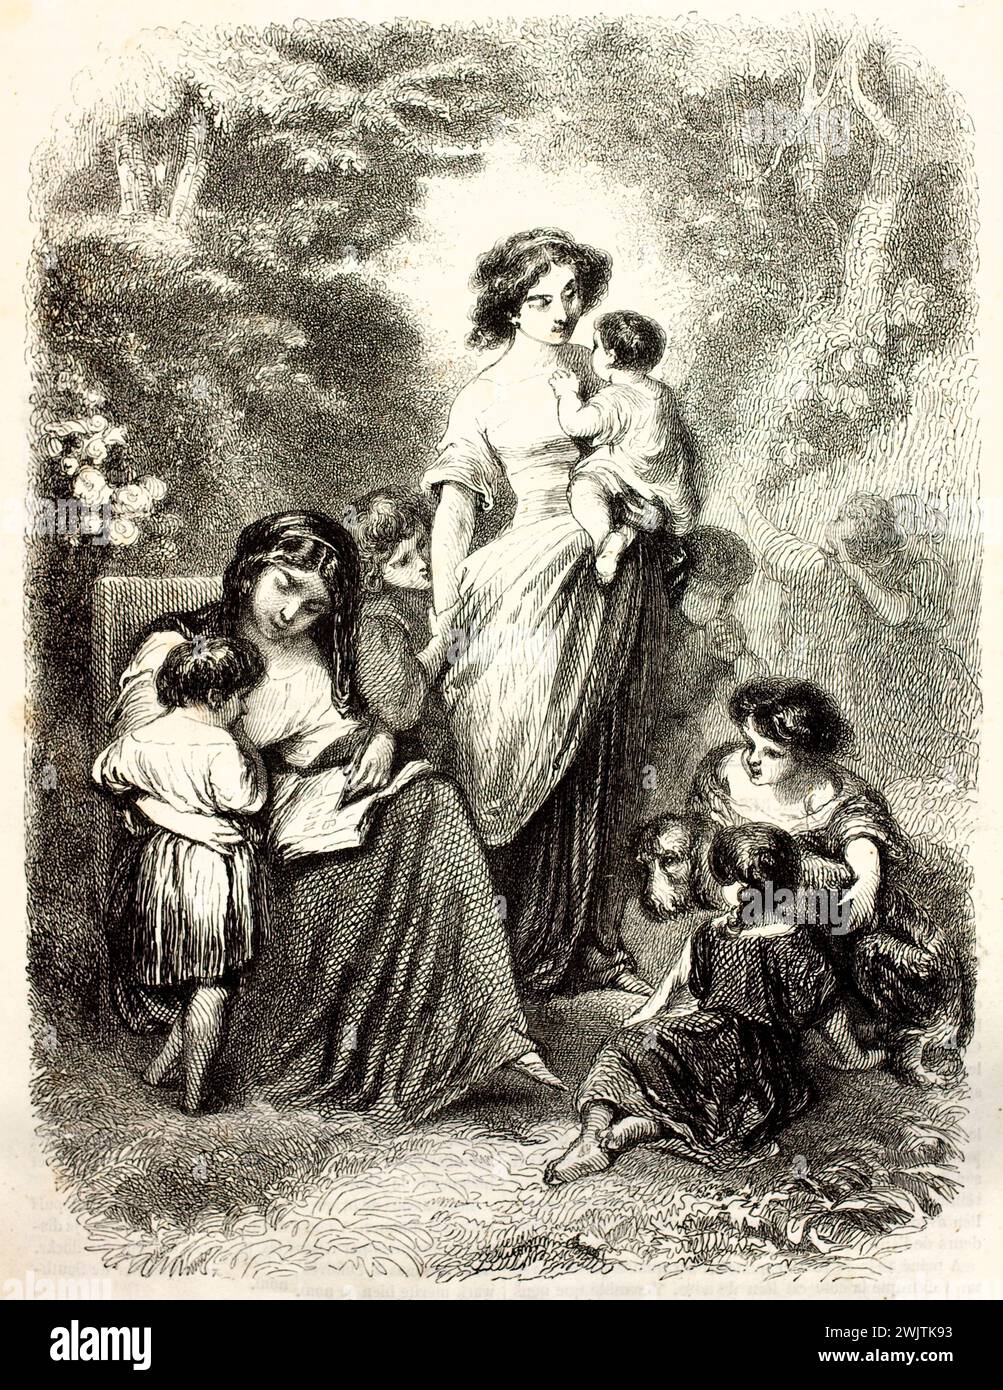 Old engraved depiction of childhood. Created by Tony Johannot, èublished on magasin Pittoresque, Paris, 1852 Stock Photo